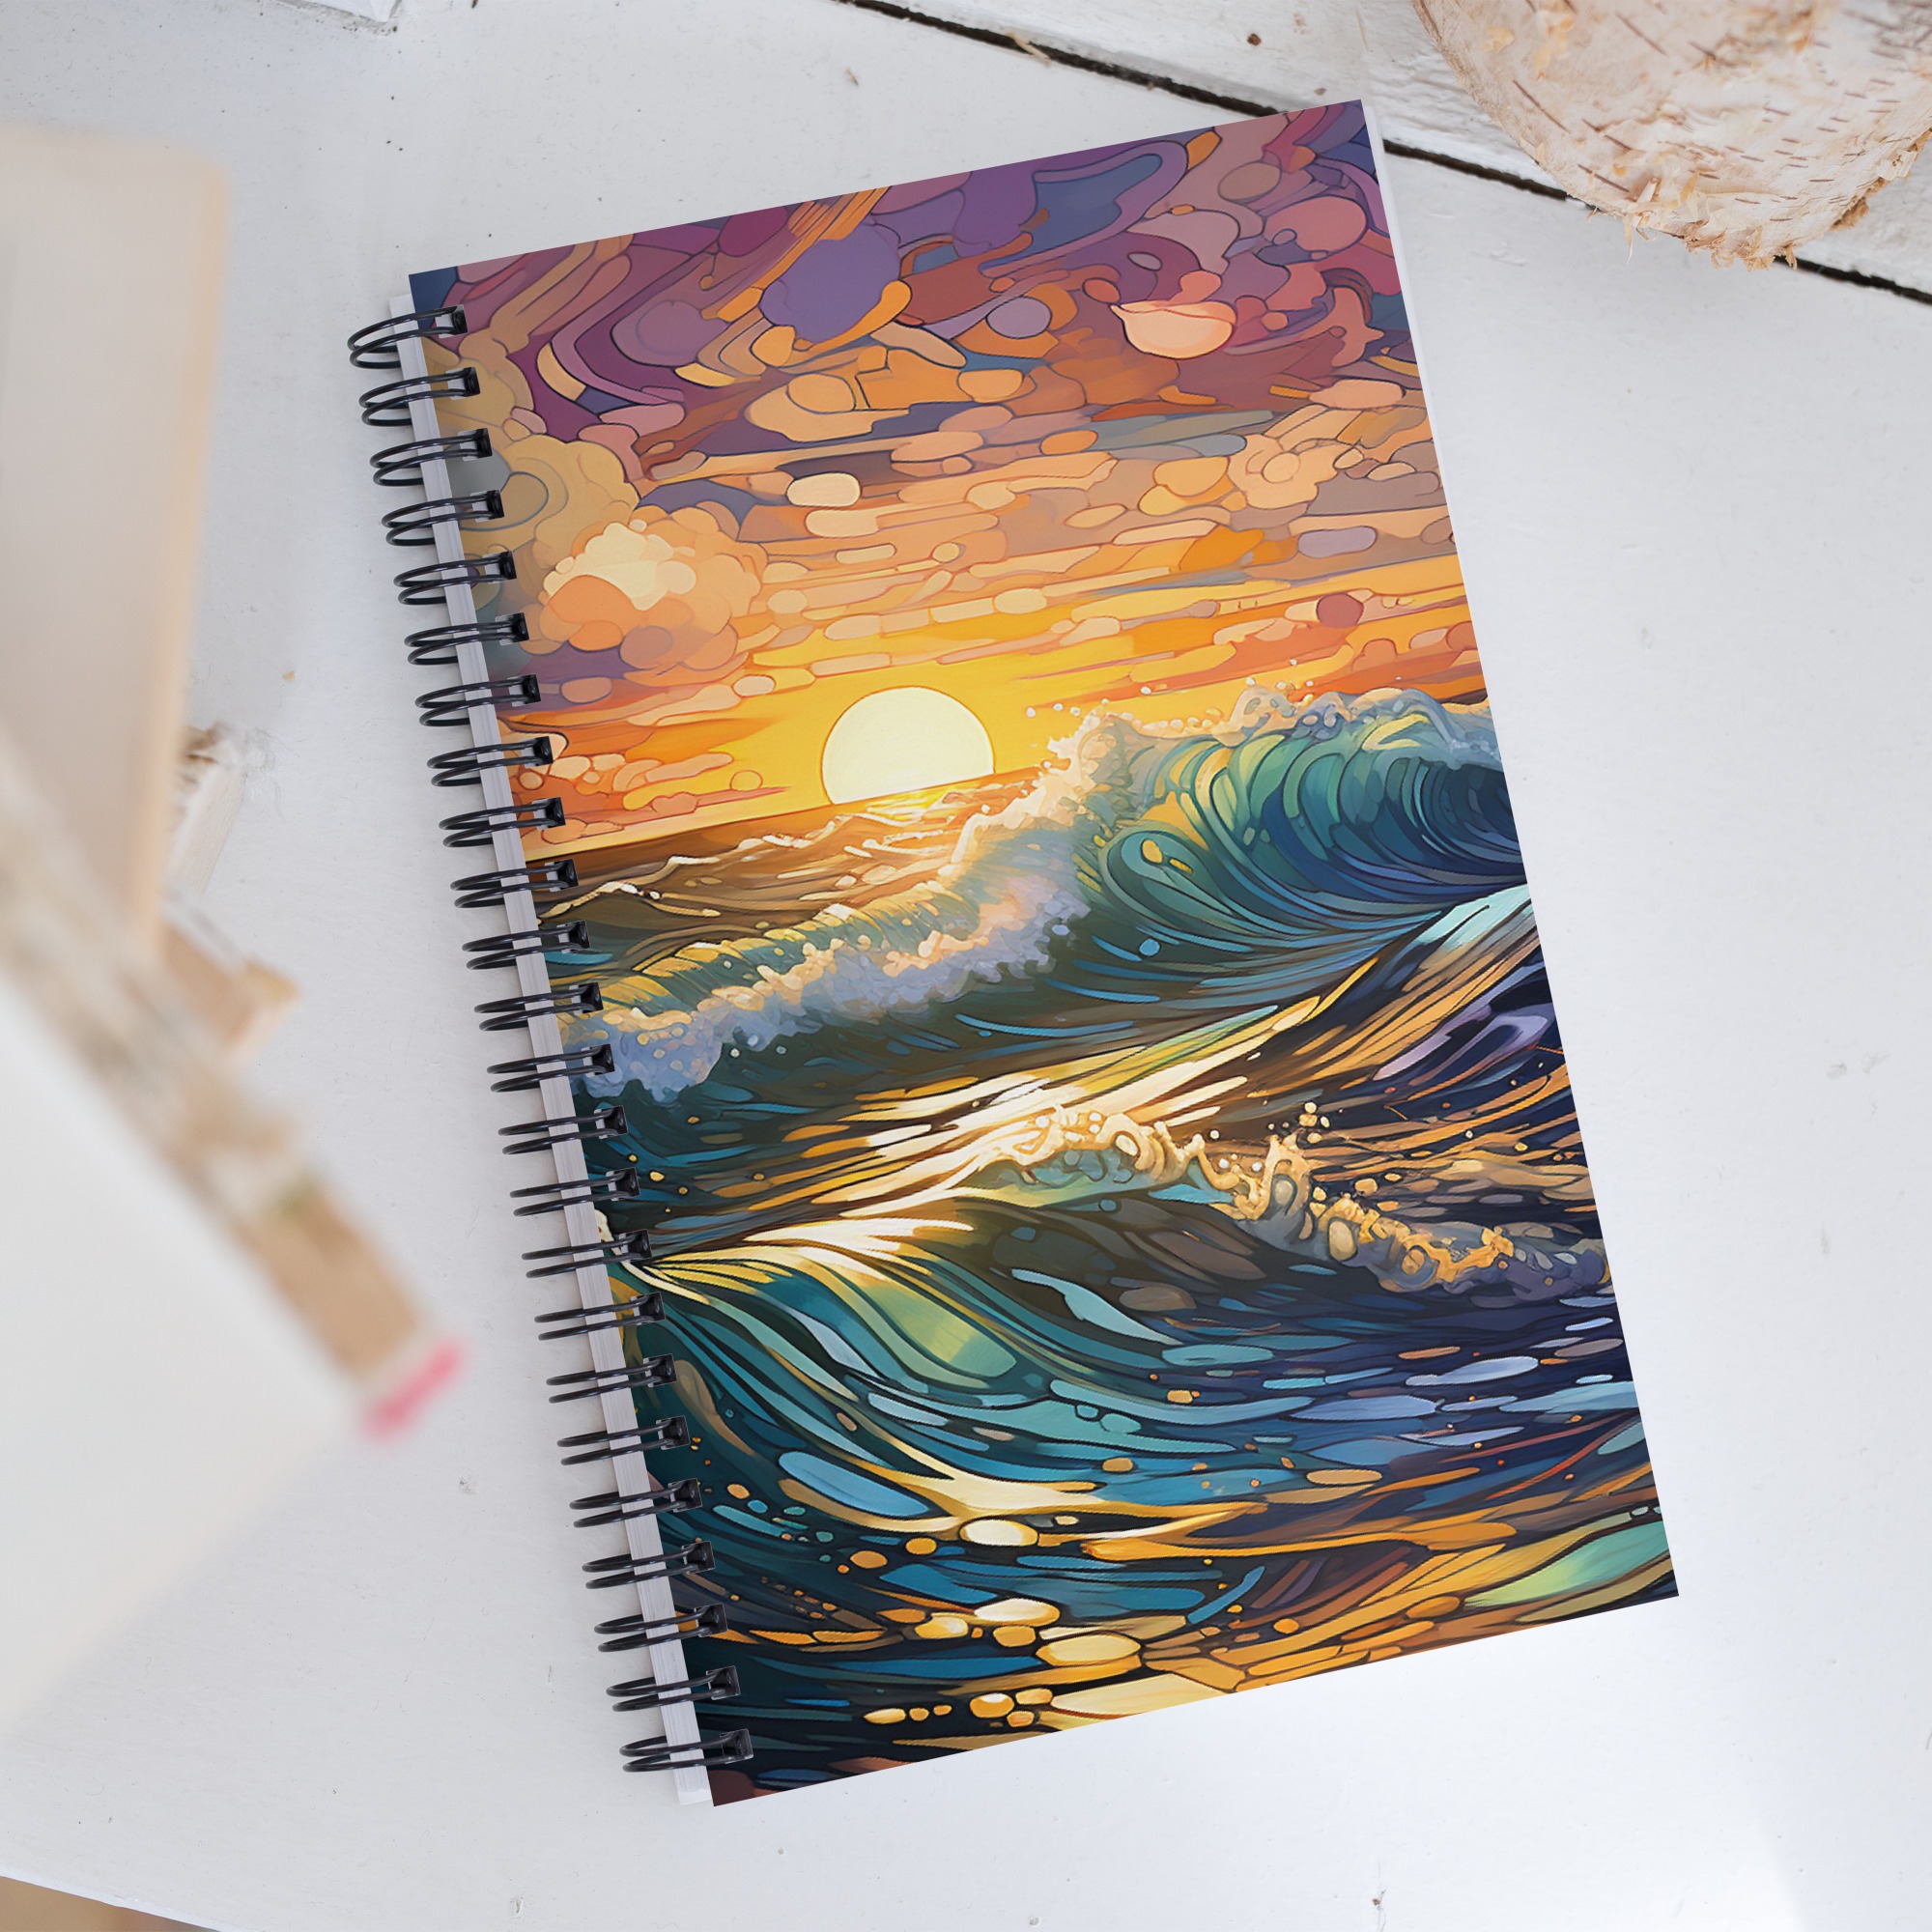 The Beach at Sunset | Stained Glass Illustrations | Spiral notebook